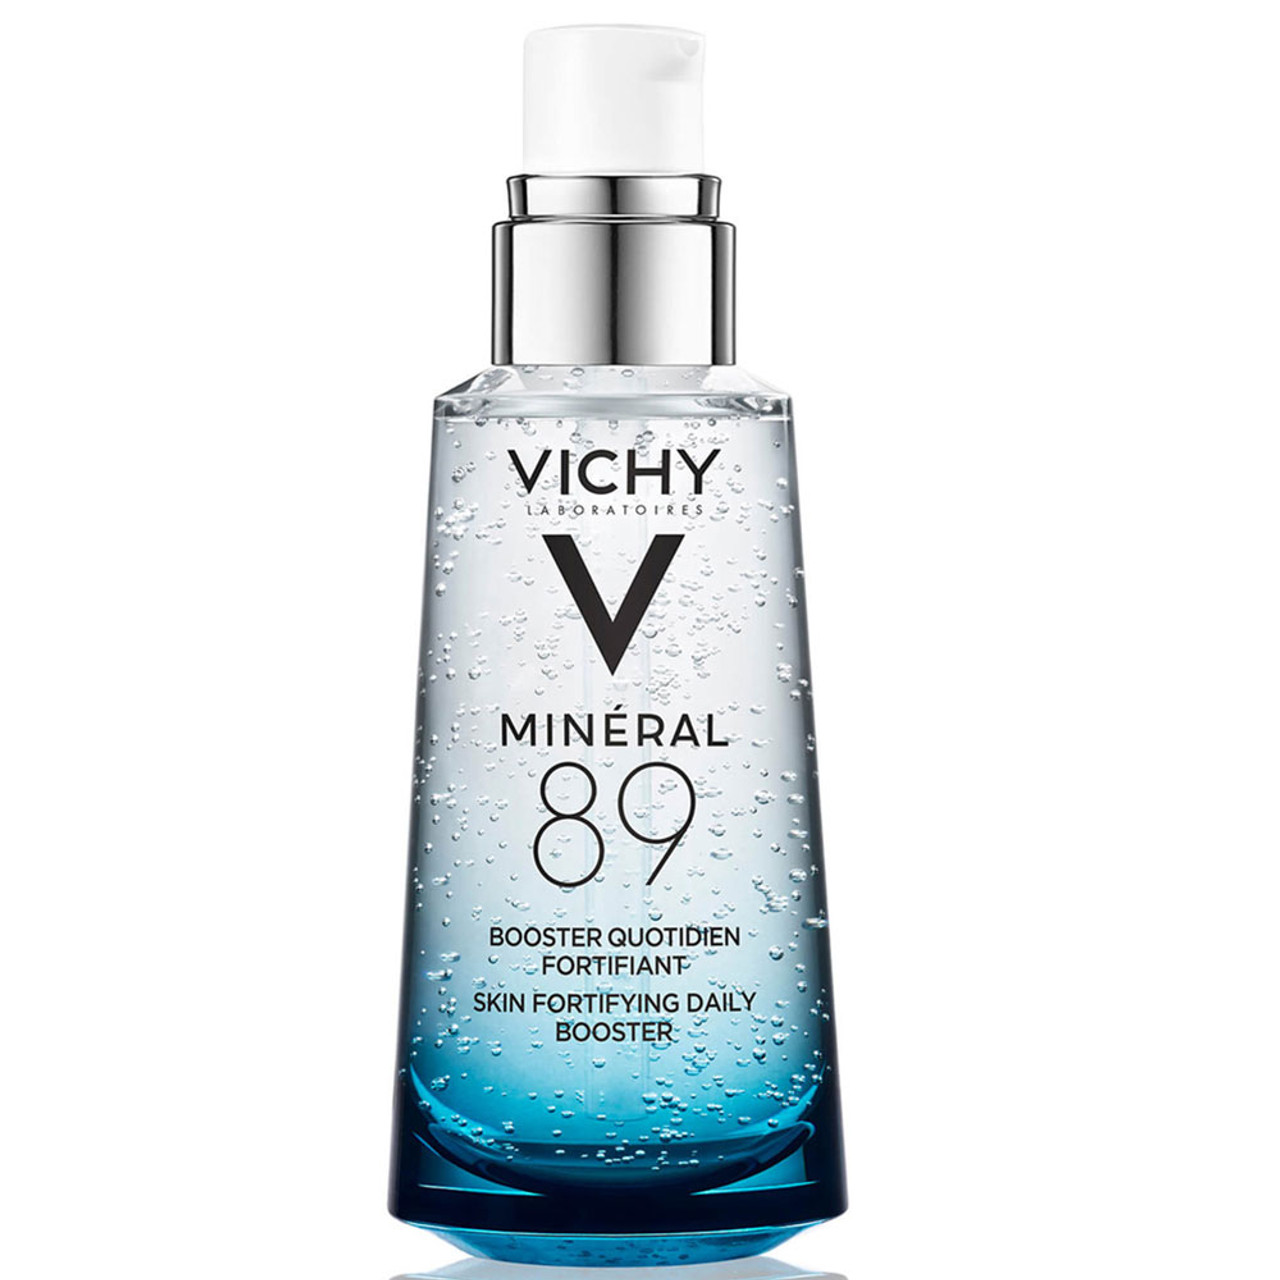 Vichy Mineral 89 Hyaluronic Acid Face Moisturizer BeautifiedYou.com